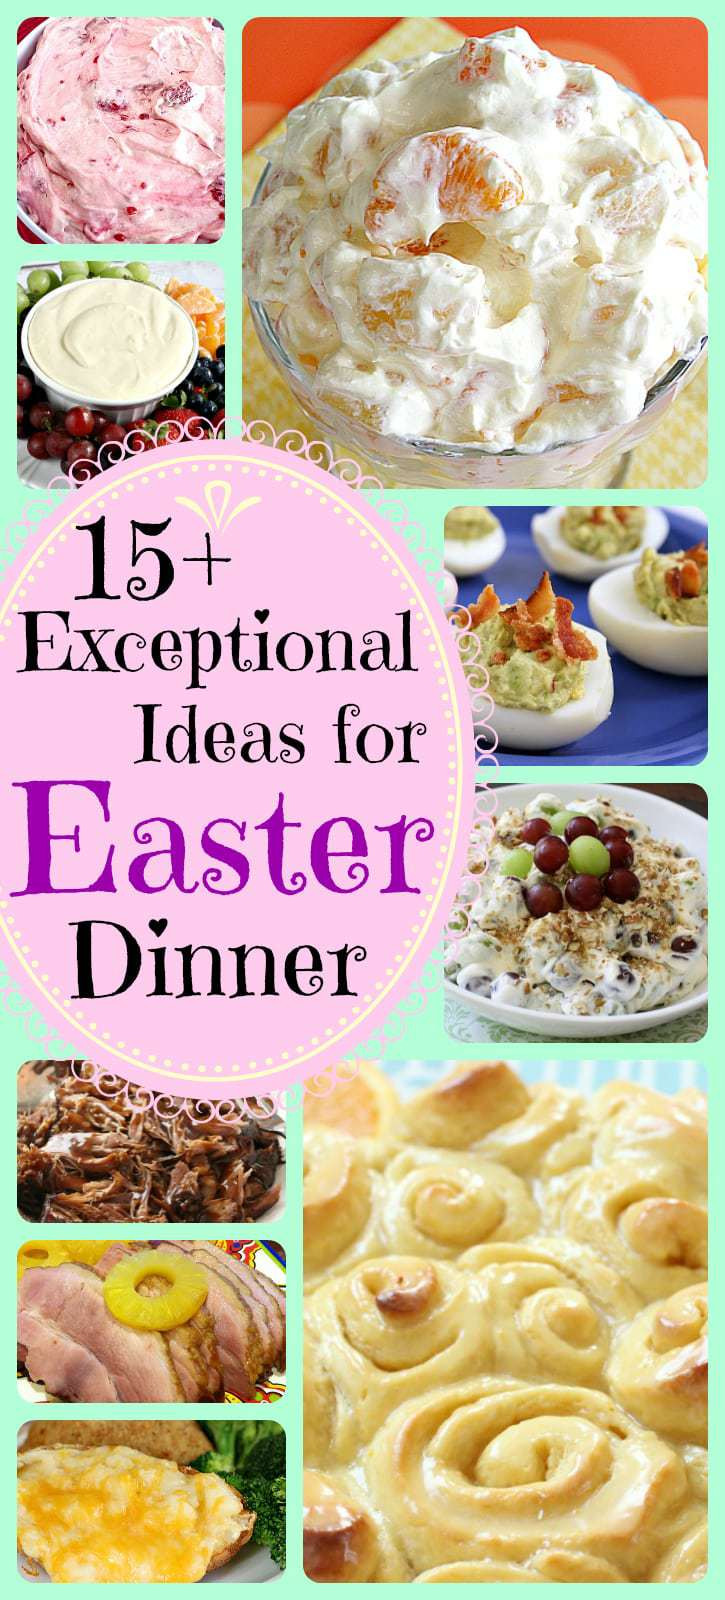 Easter Dinner For Two Ideas
 EASY & DELICIOUS EASTER DINNER RECIPES Butter with a